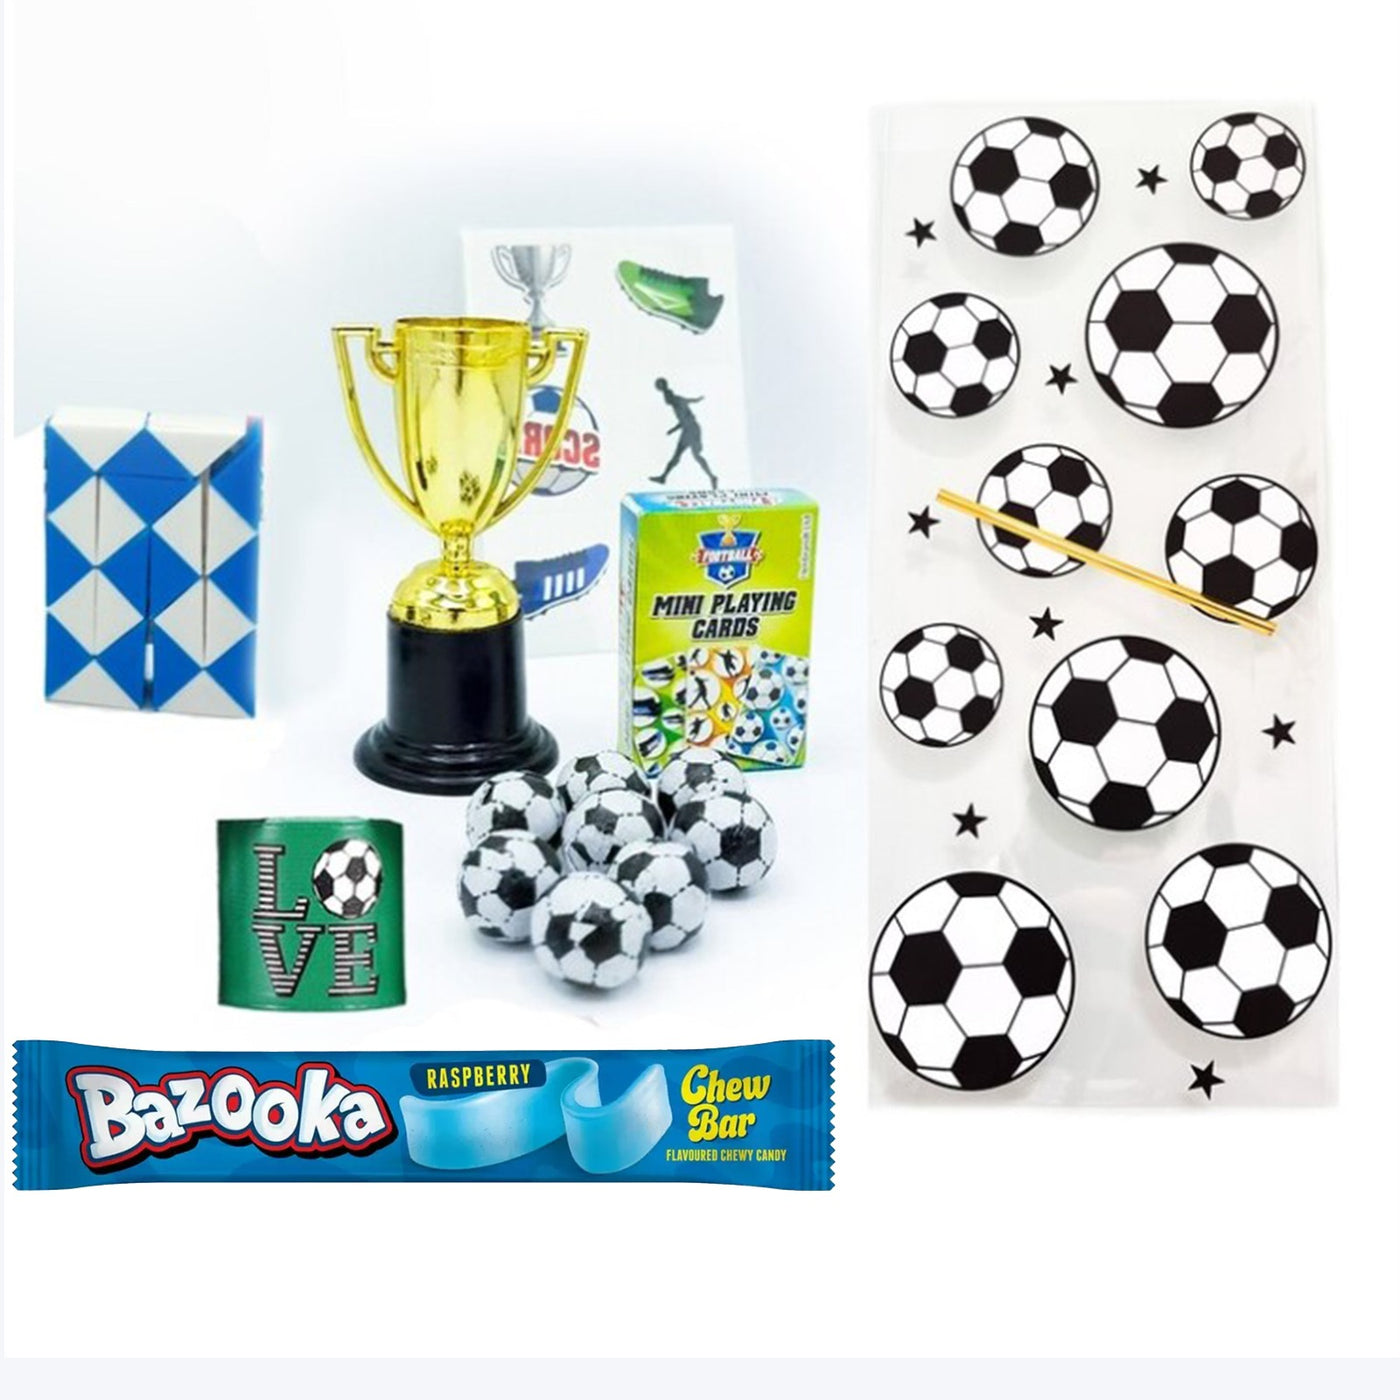 Boys Pre Filled Football Birthday Party Favours, Goody Bags With Toys And Sweets.